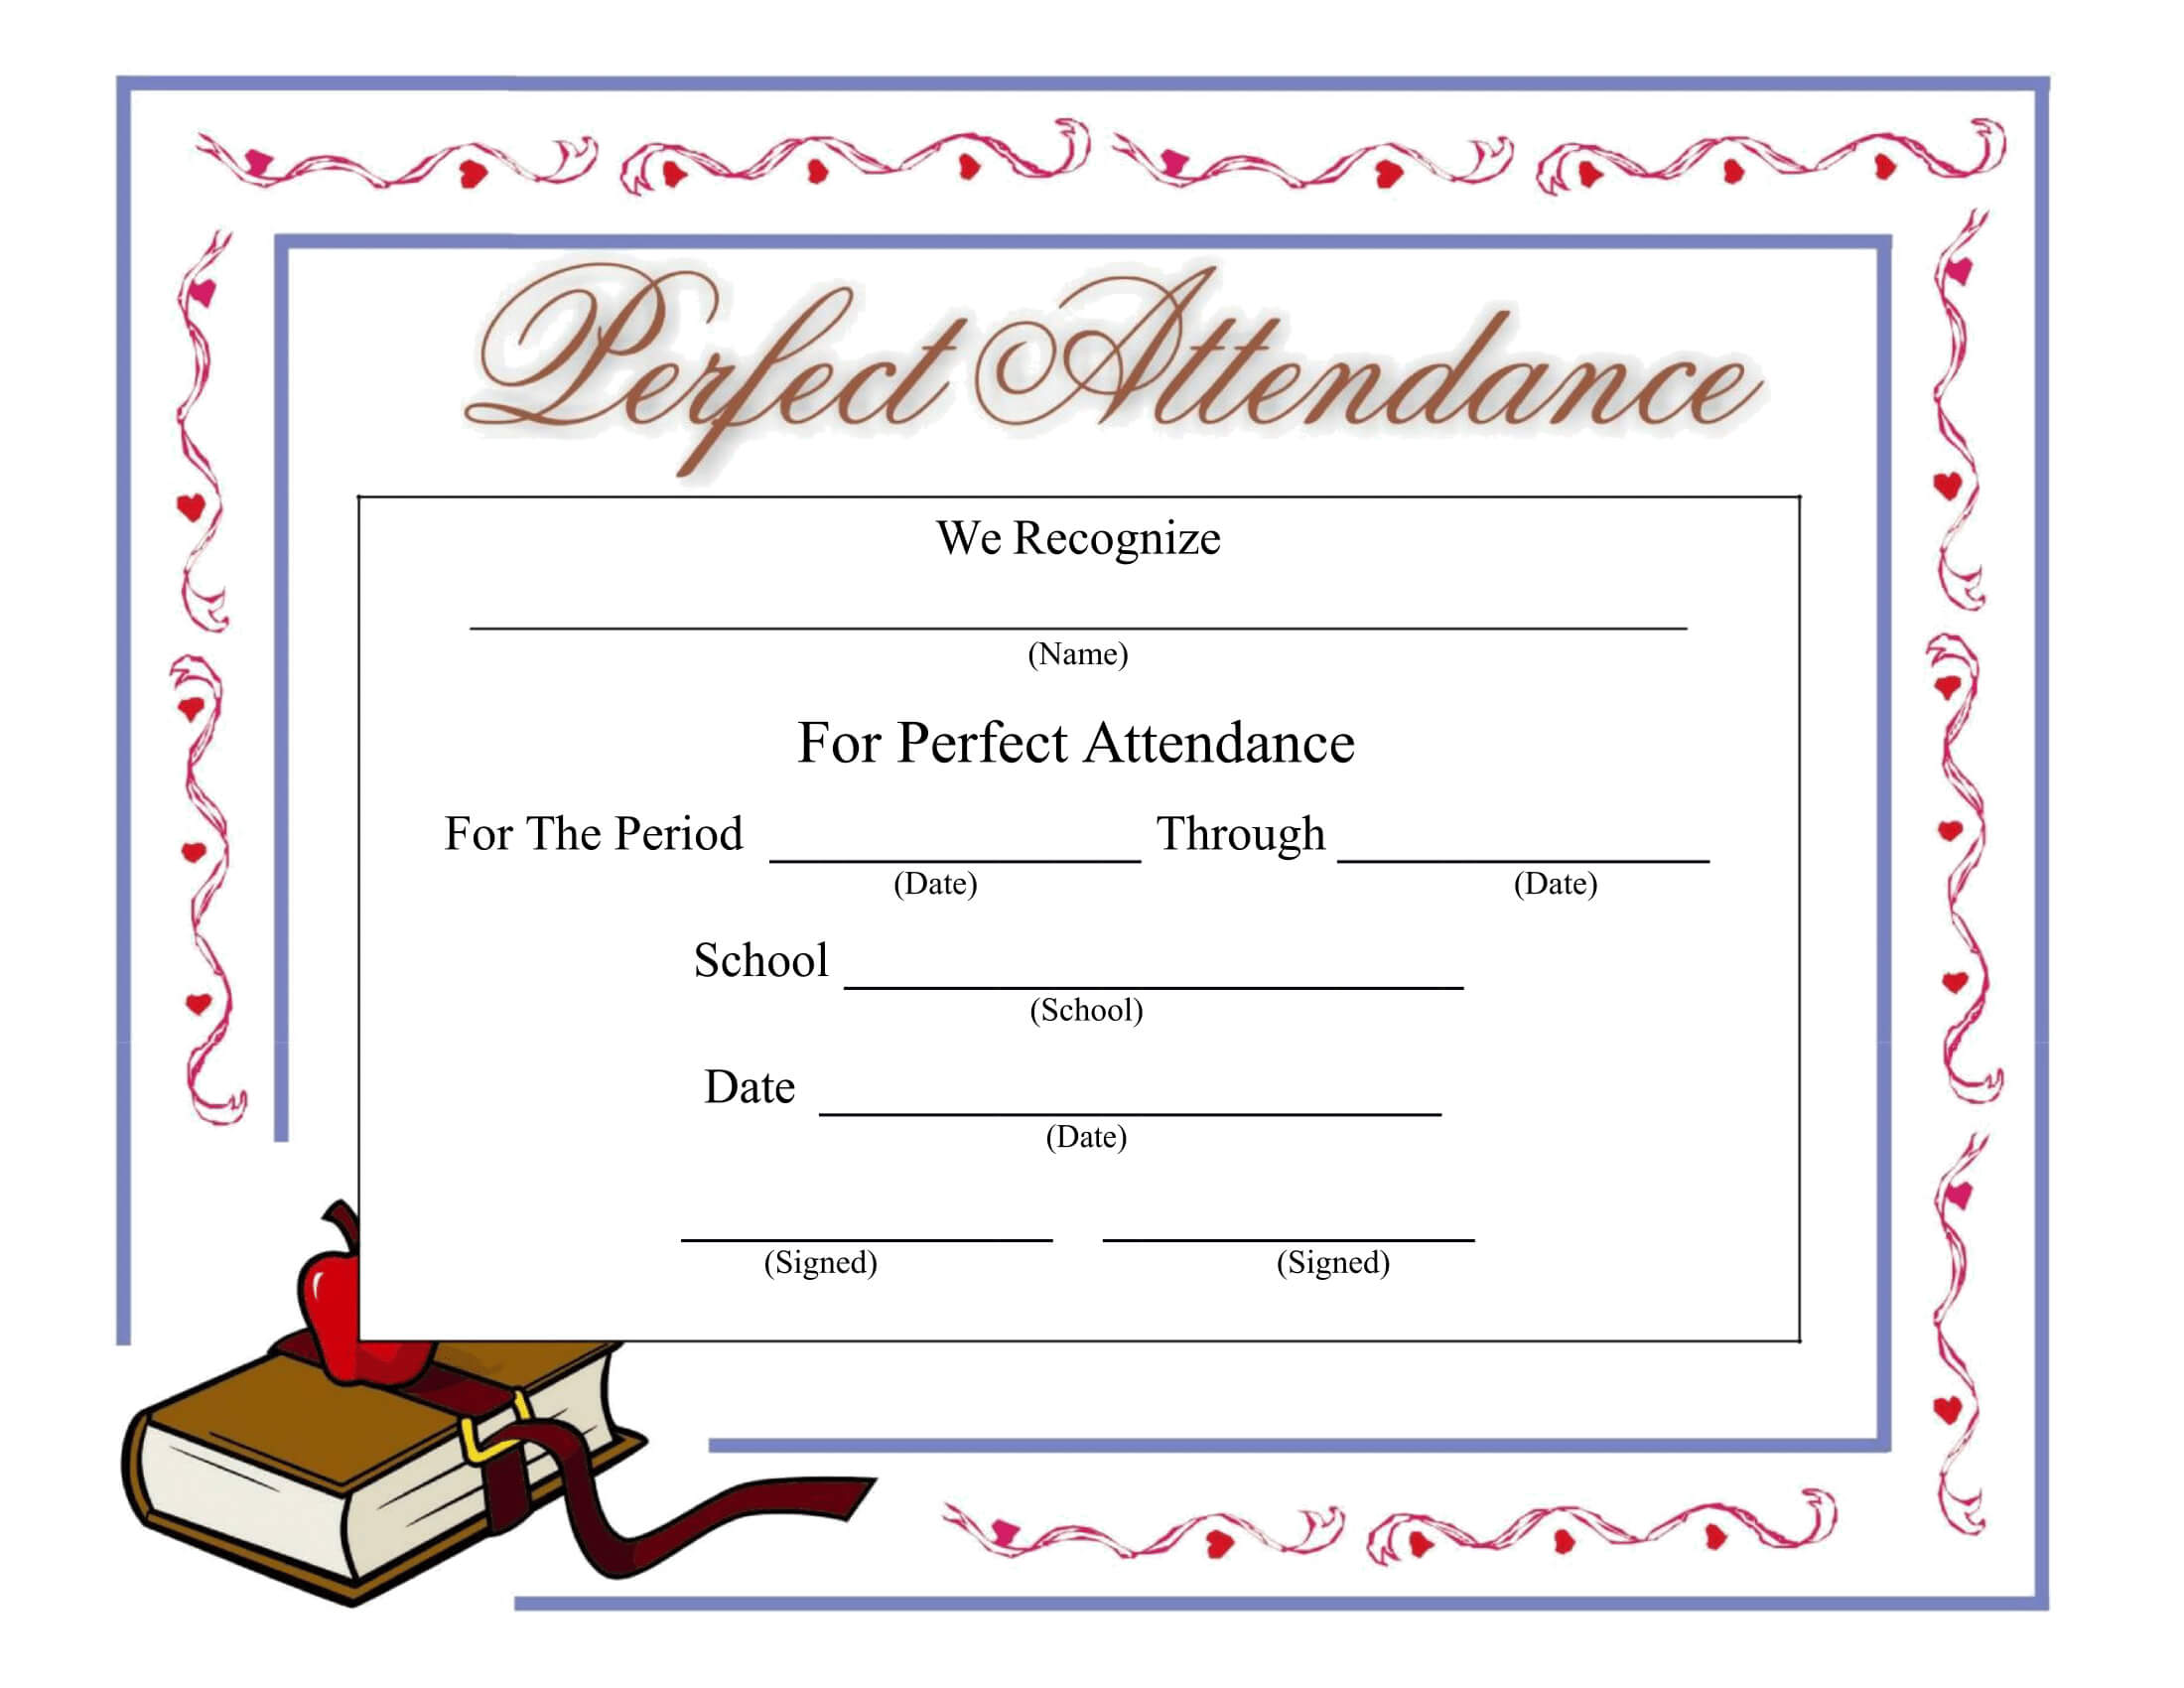 Perfect Attendance Certificate - Download A Free Template With Regard To Perfect Attendance Certificate Template